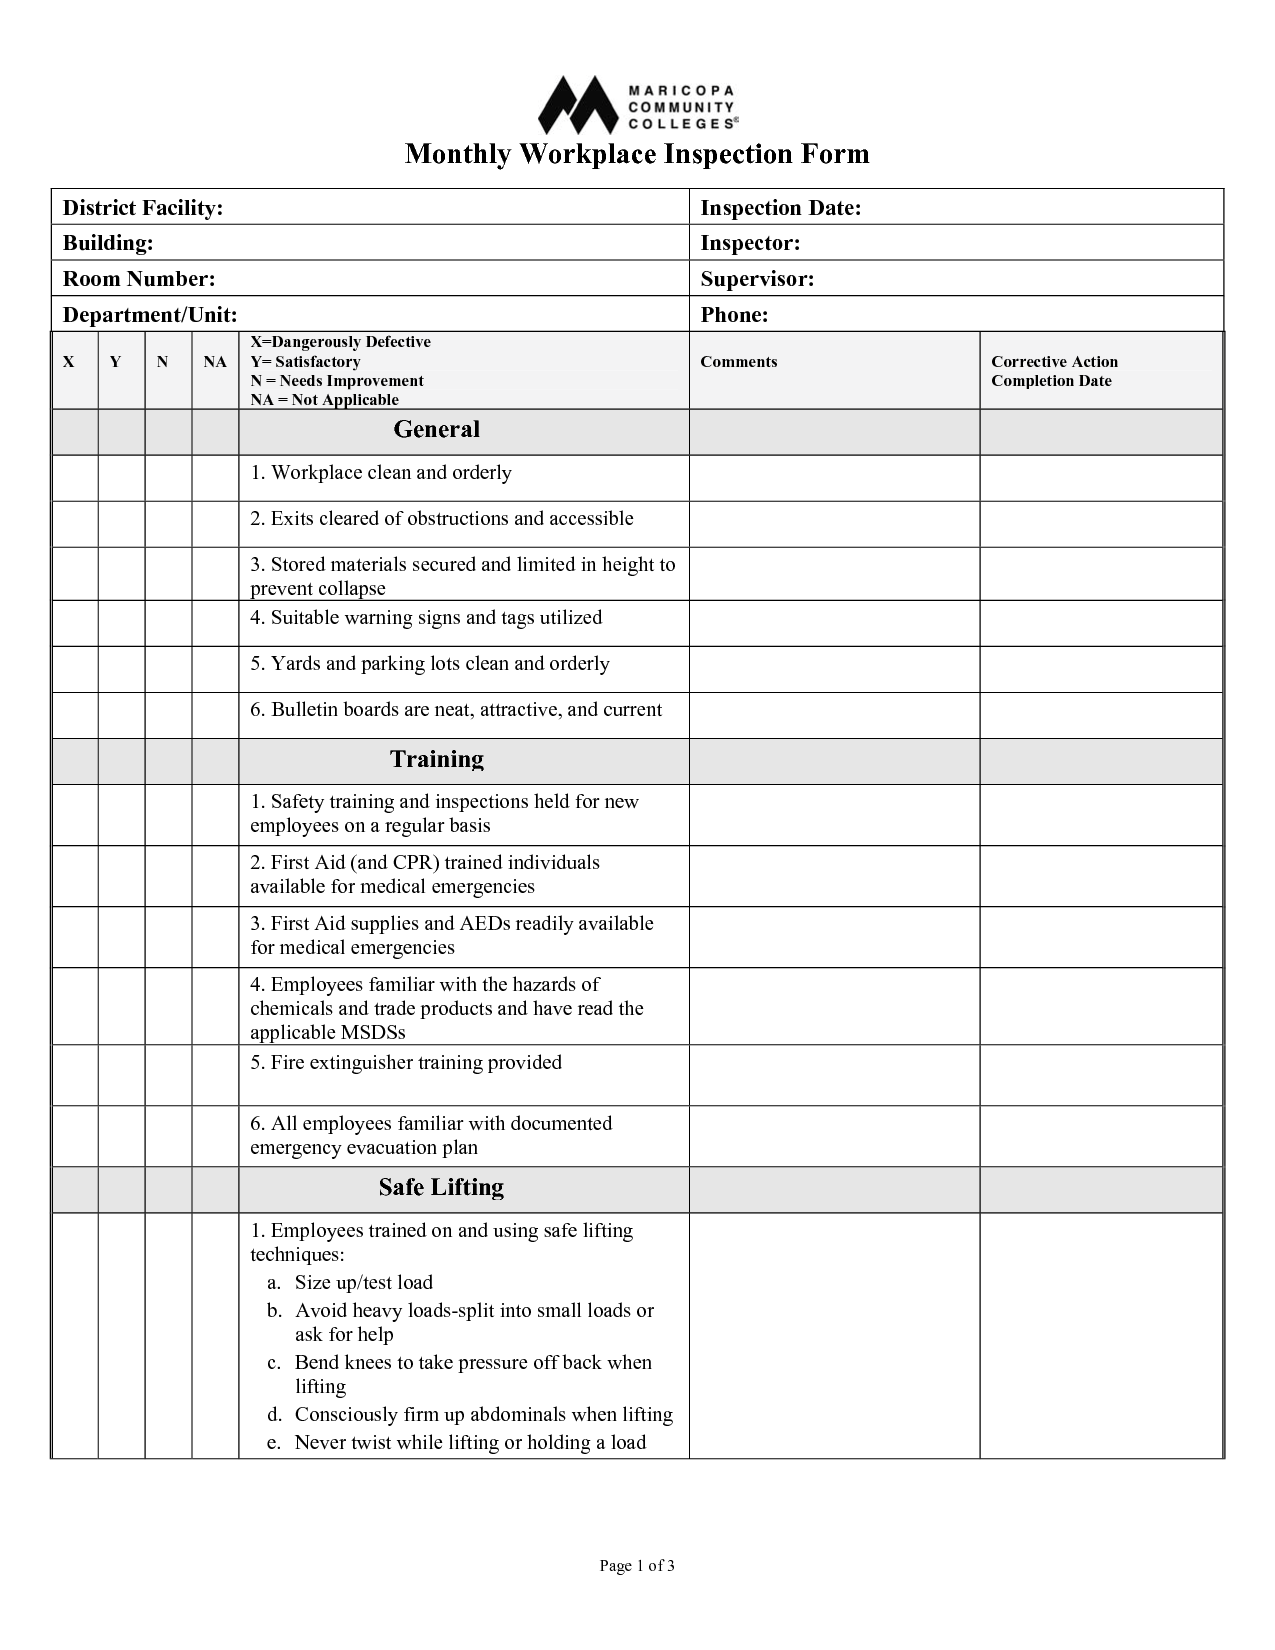 Health Safety Inspection Workplace Inspection Checklist Template  Intended For Workplace Safety Inspection Checklist Template Inside Workplace Safety Inspection Checklist Template